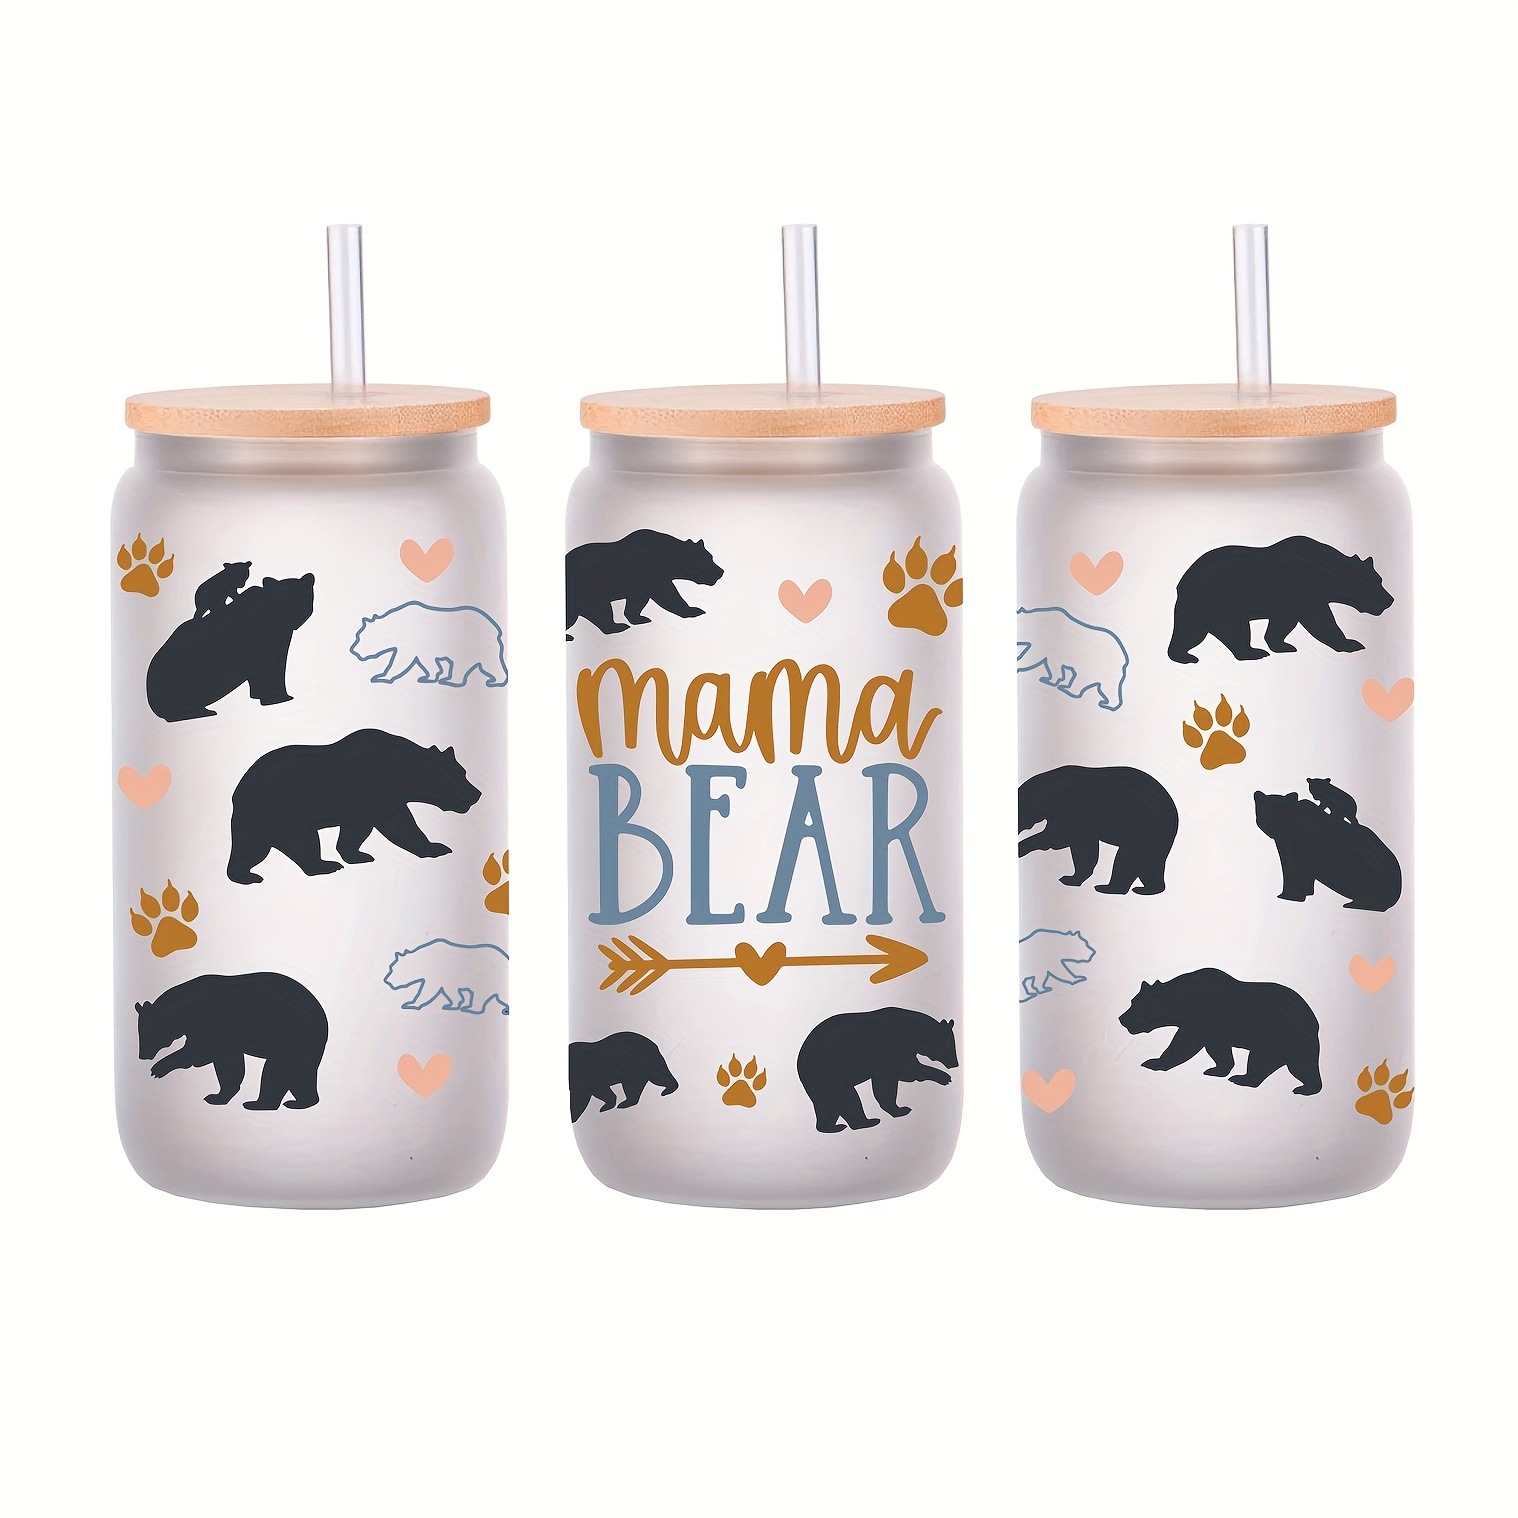 I Love You Beary Much Graphic 16oz. Libbey Cup